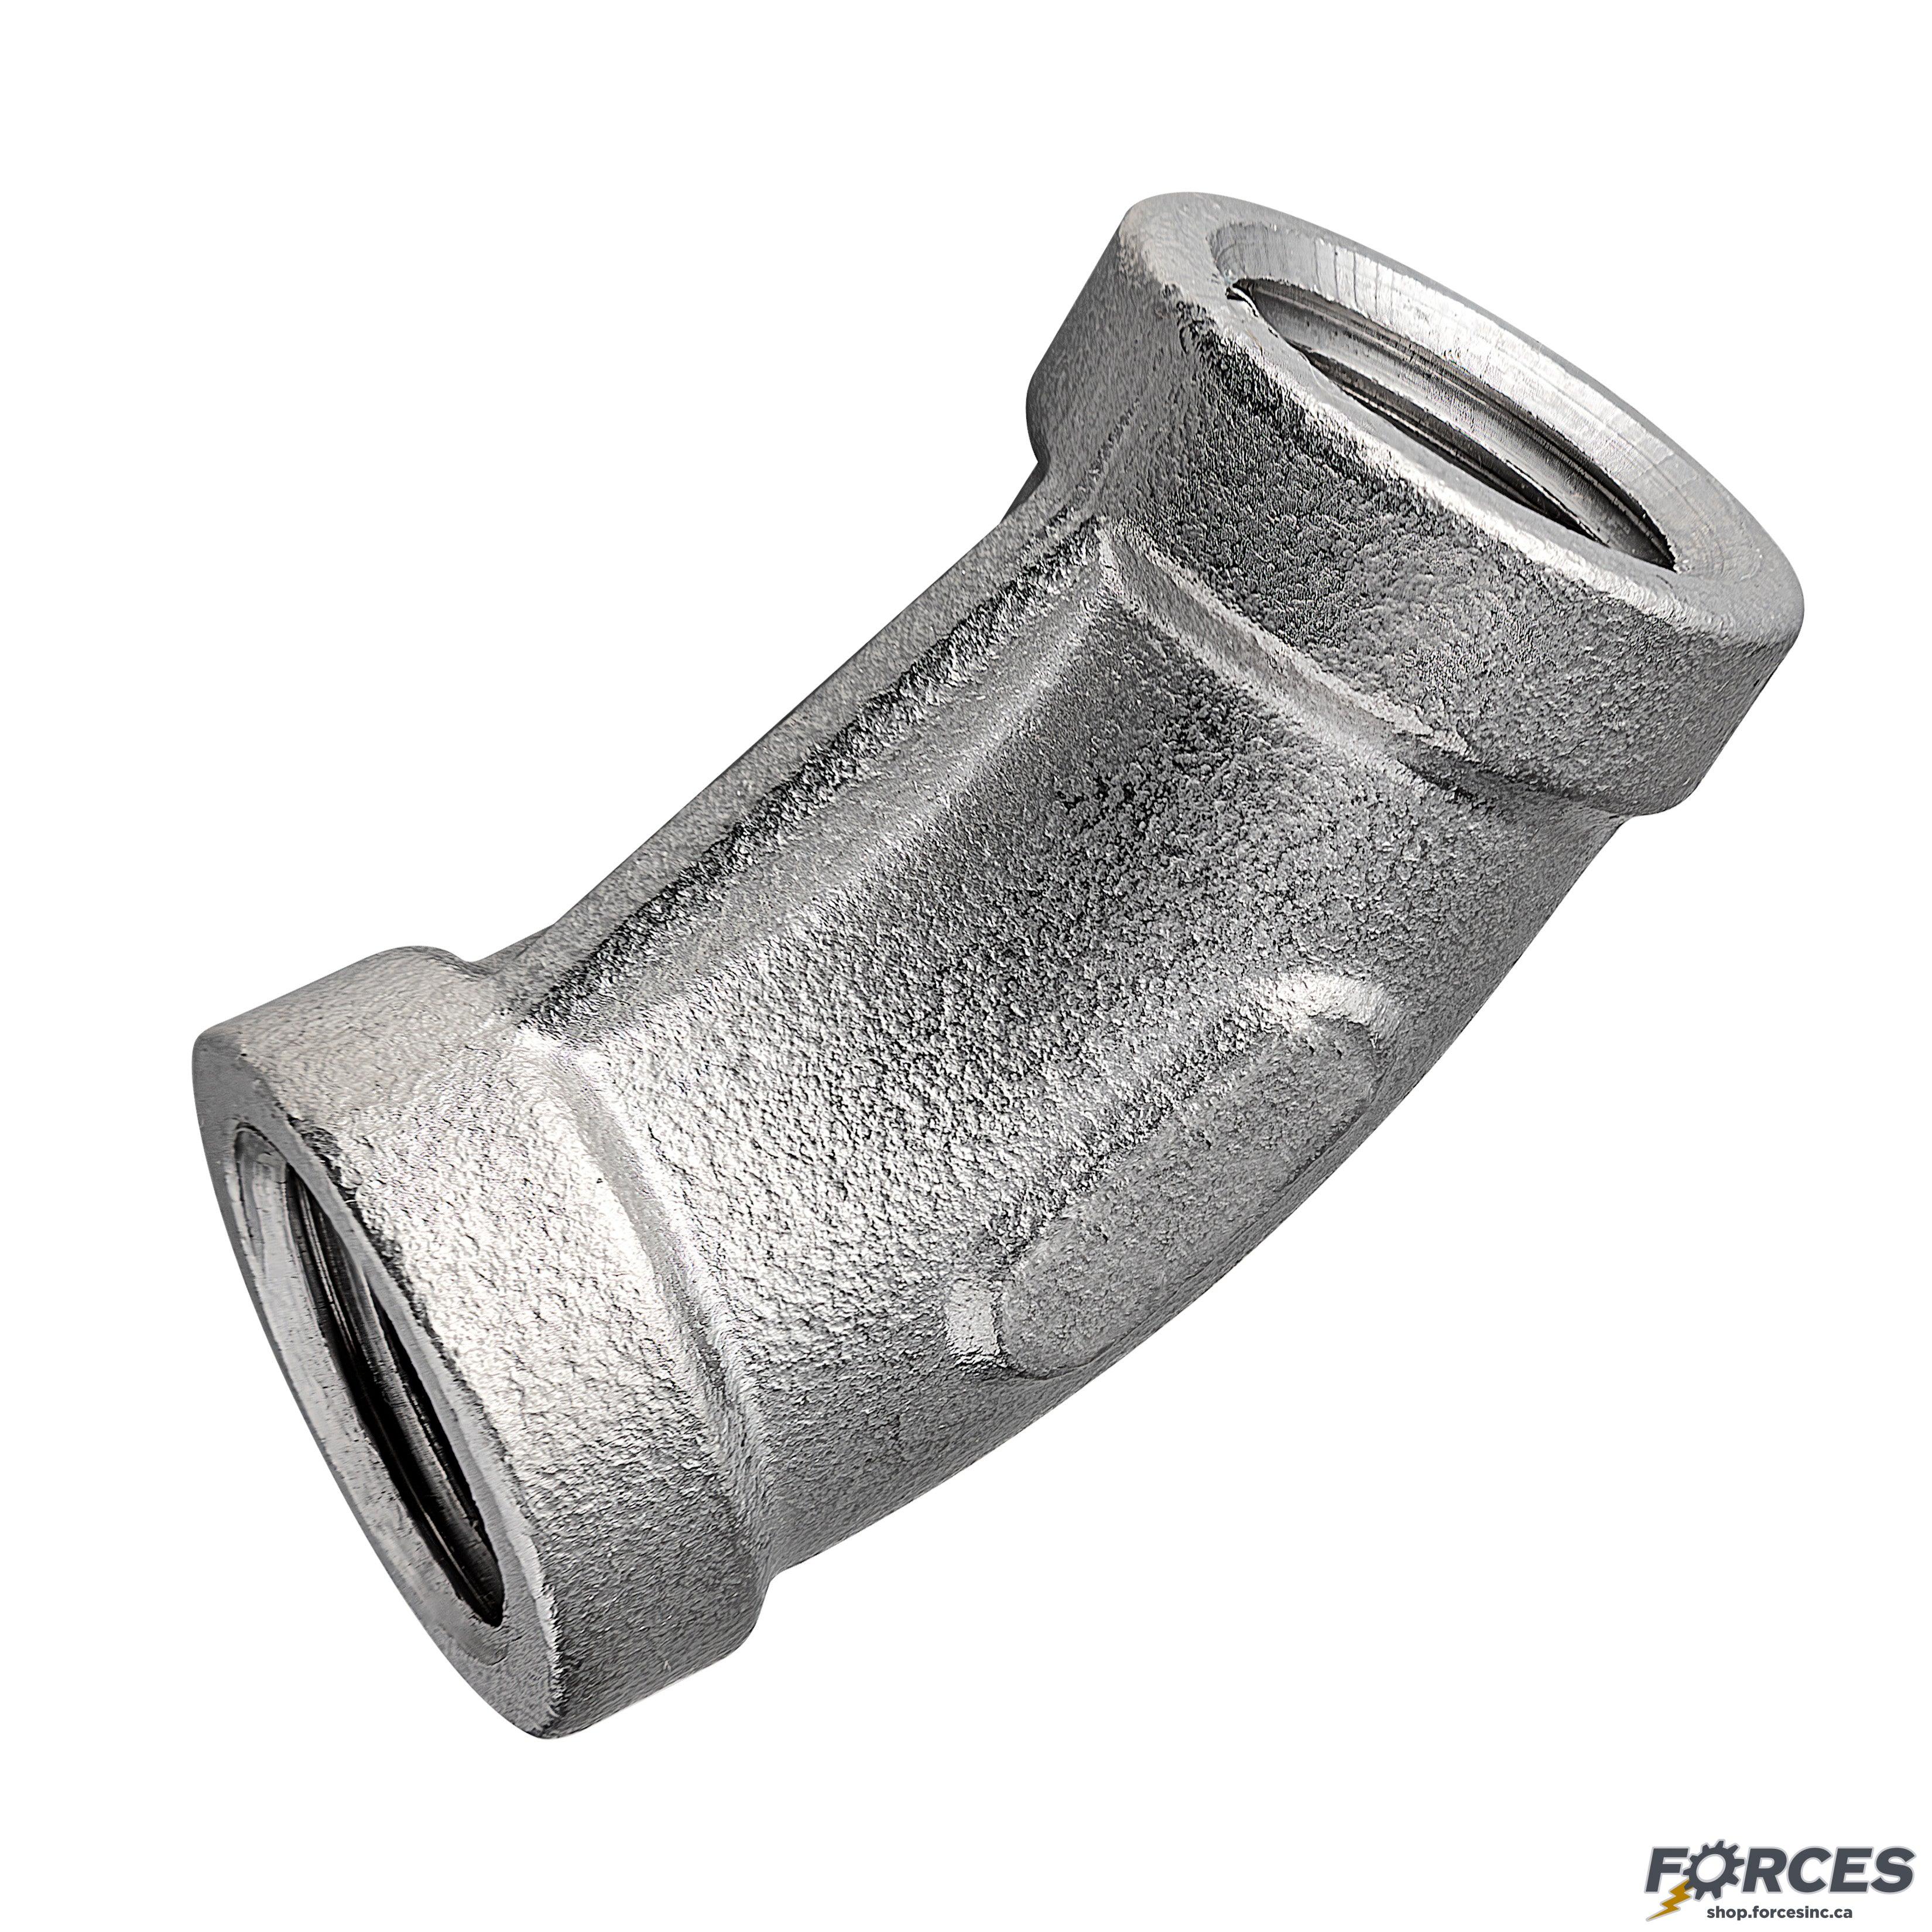 1-1/2" Elbow 45° NPT #150 - Stainless Steel 316 - Forces Inc